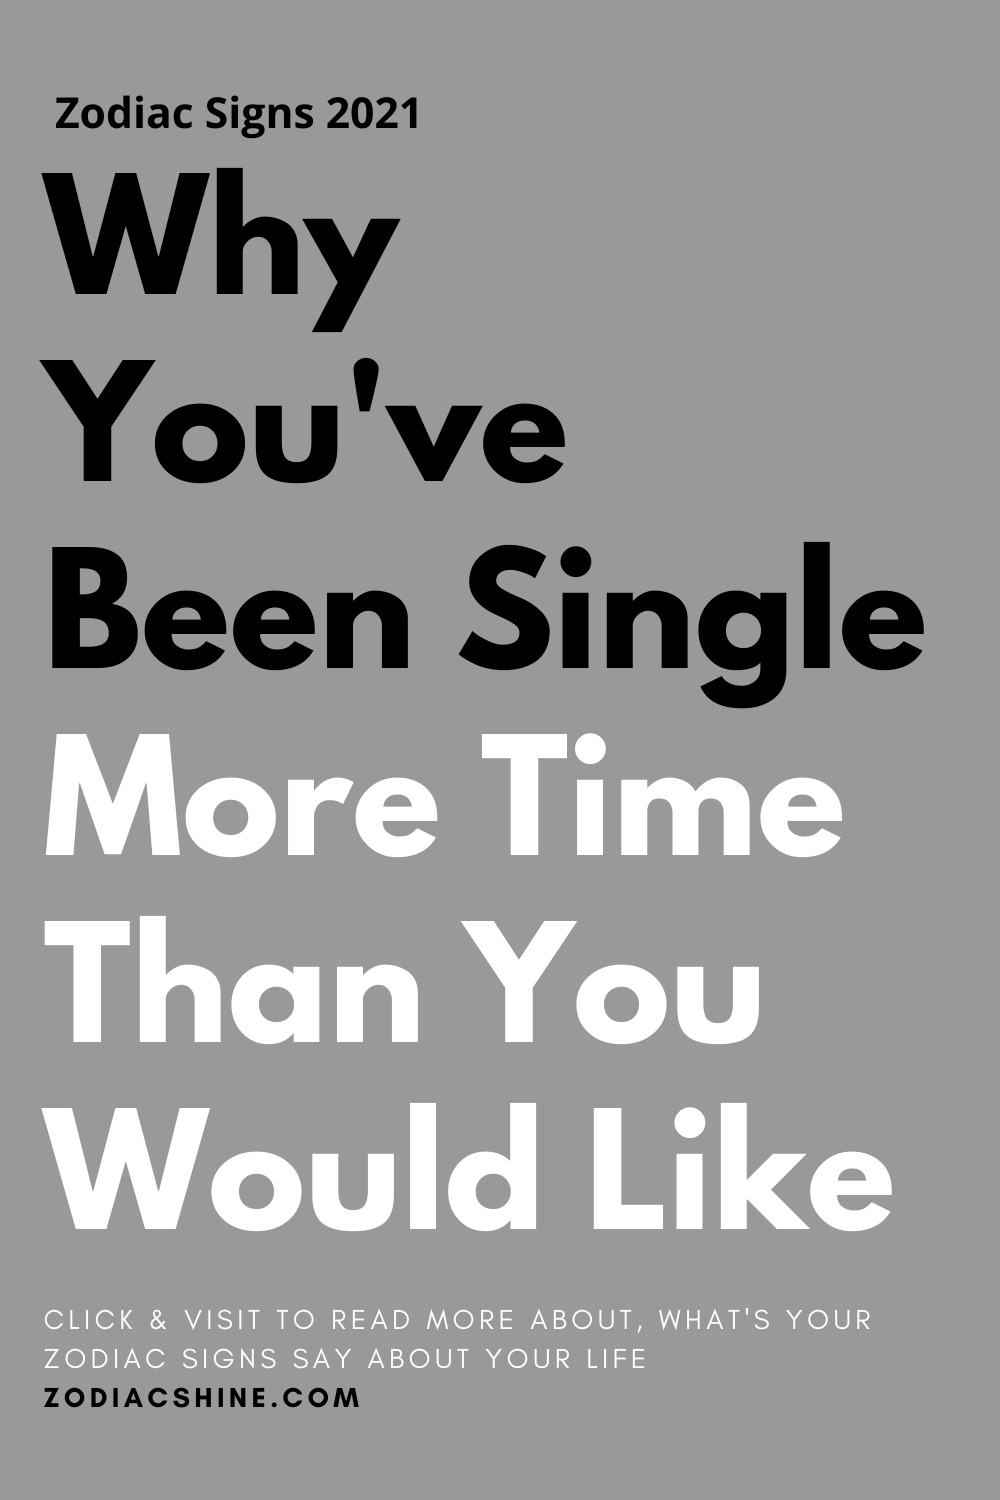 Why You've Been Single More Time Than You Would Like